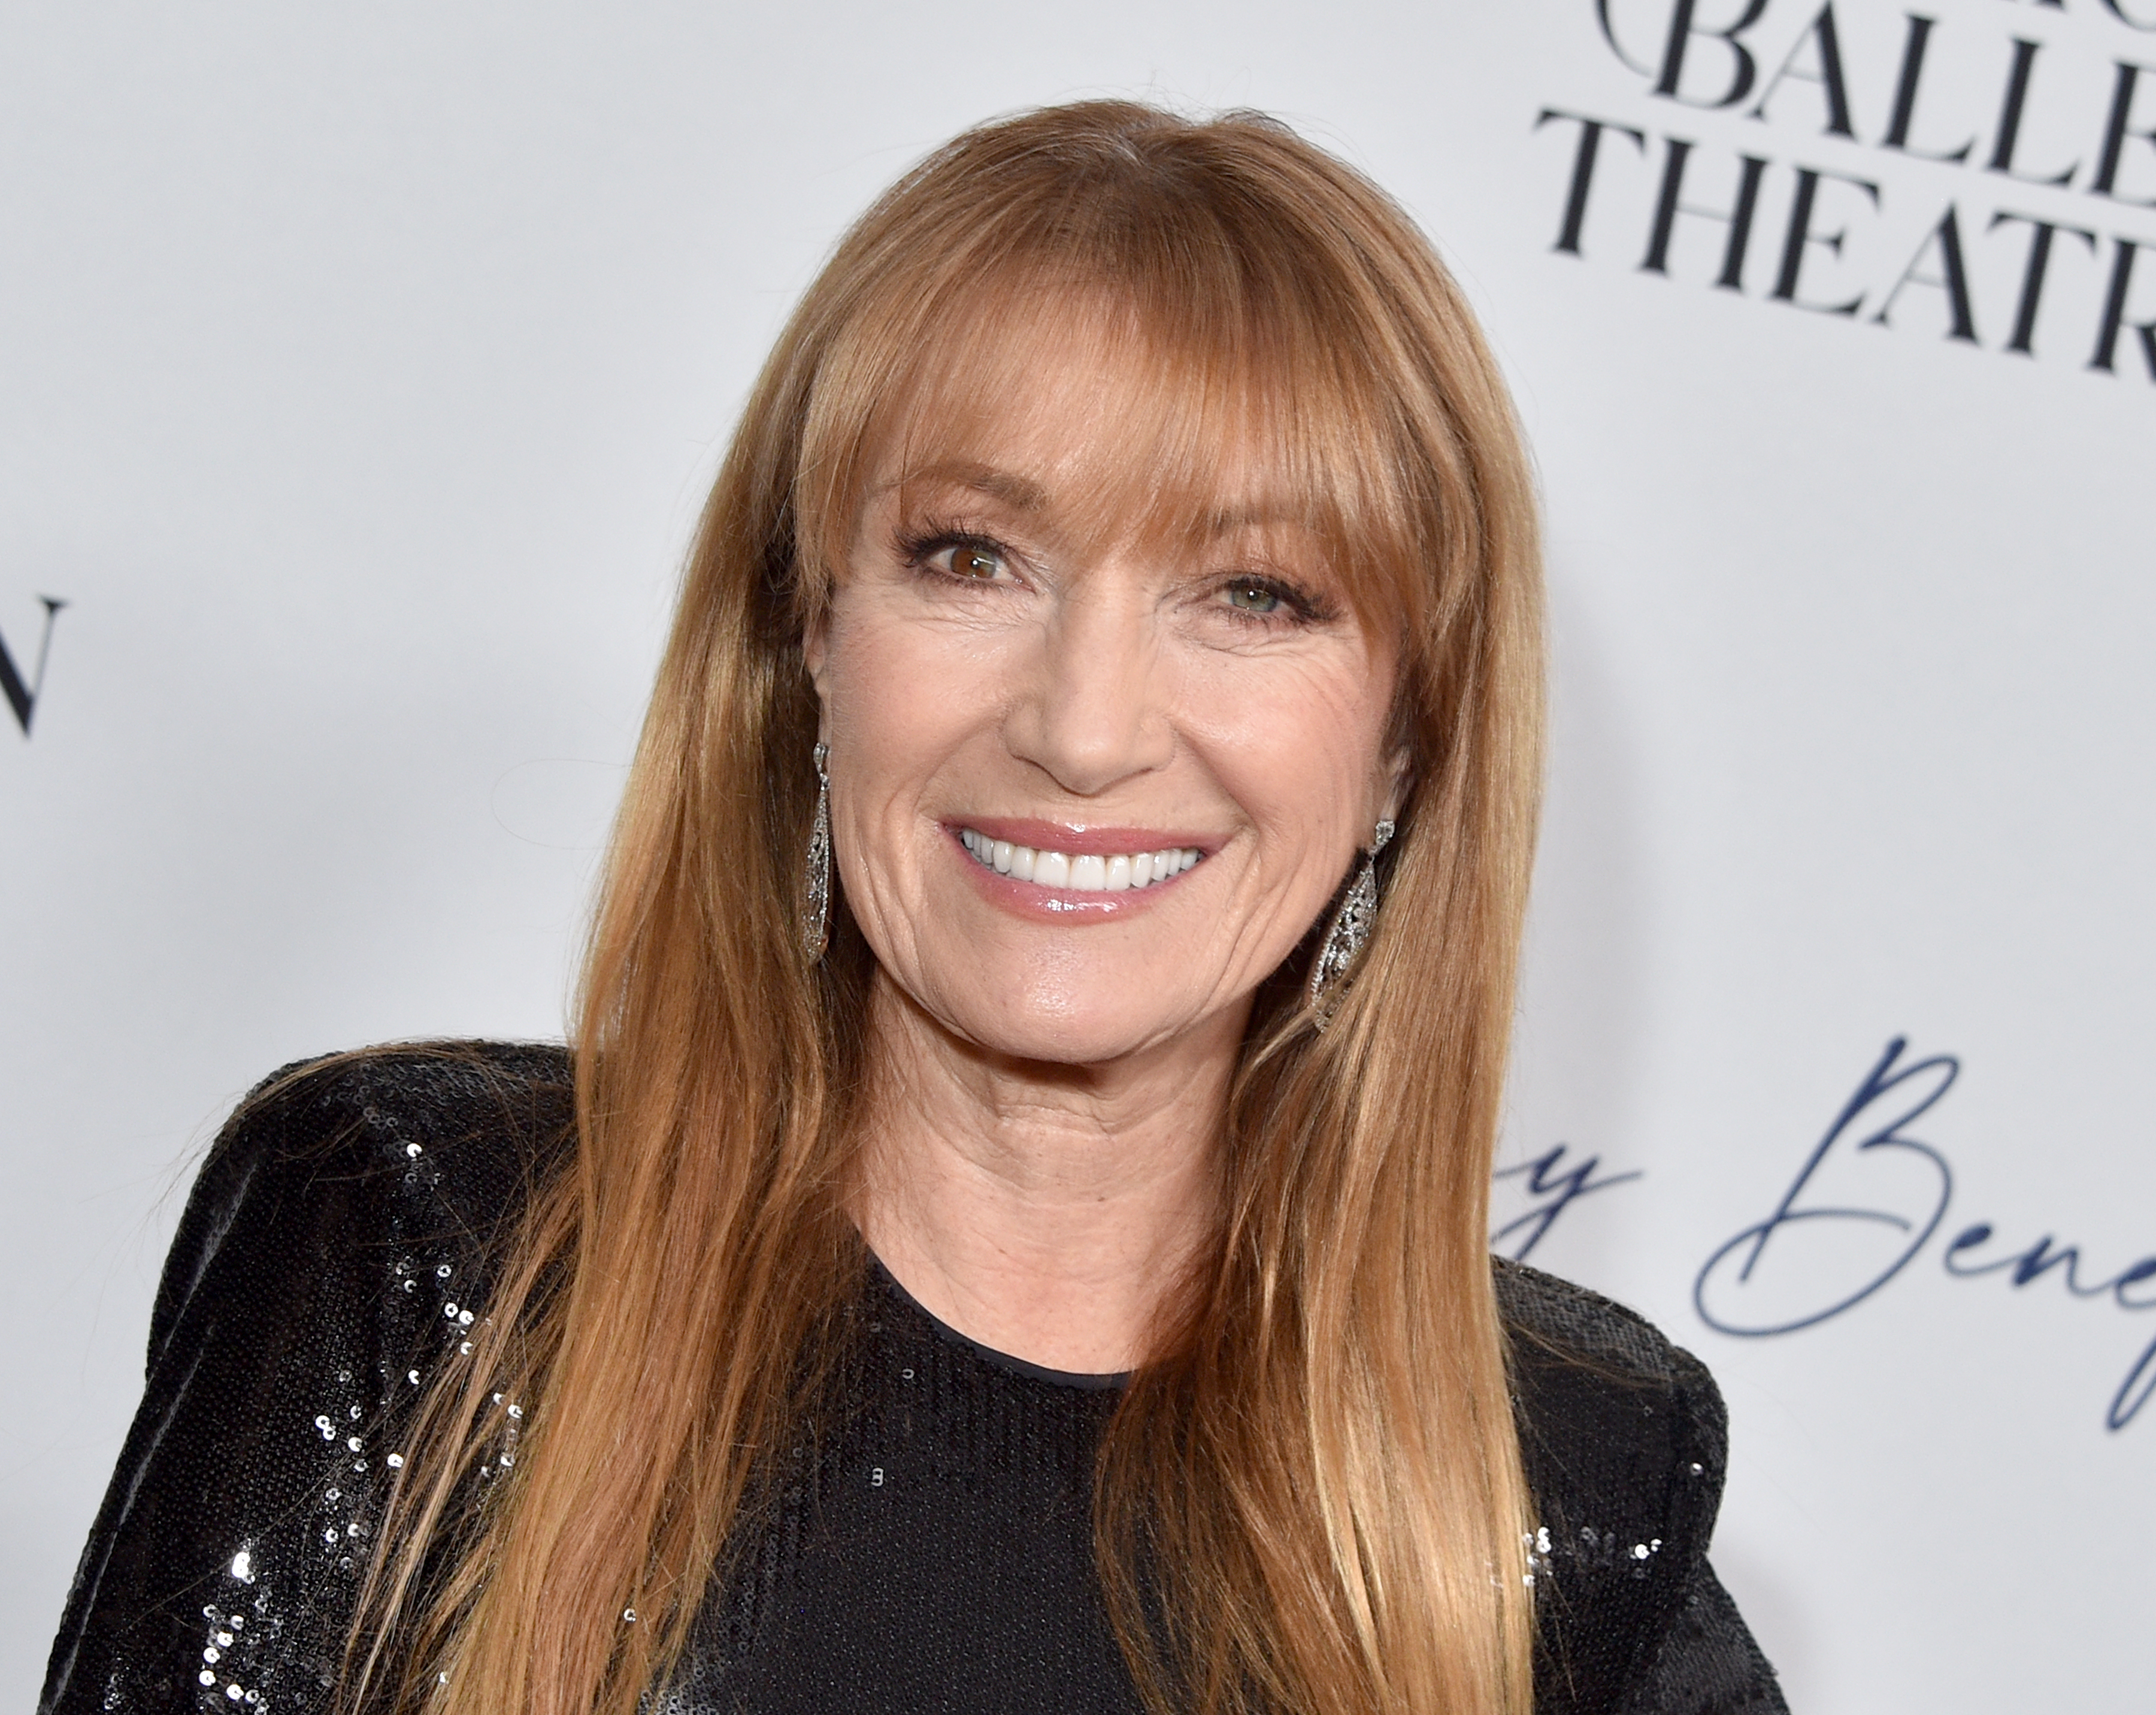 Jane Seymour smiling in a black sequined top at an event